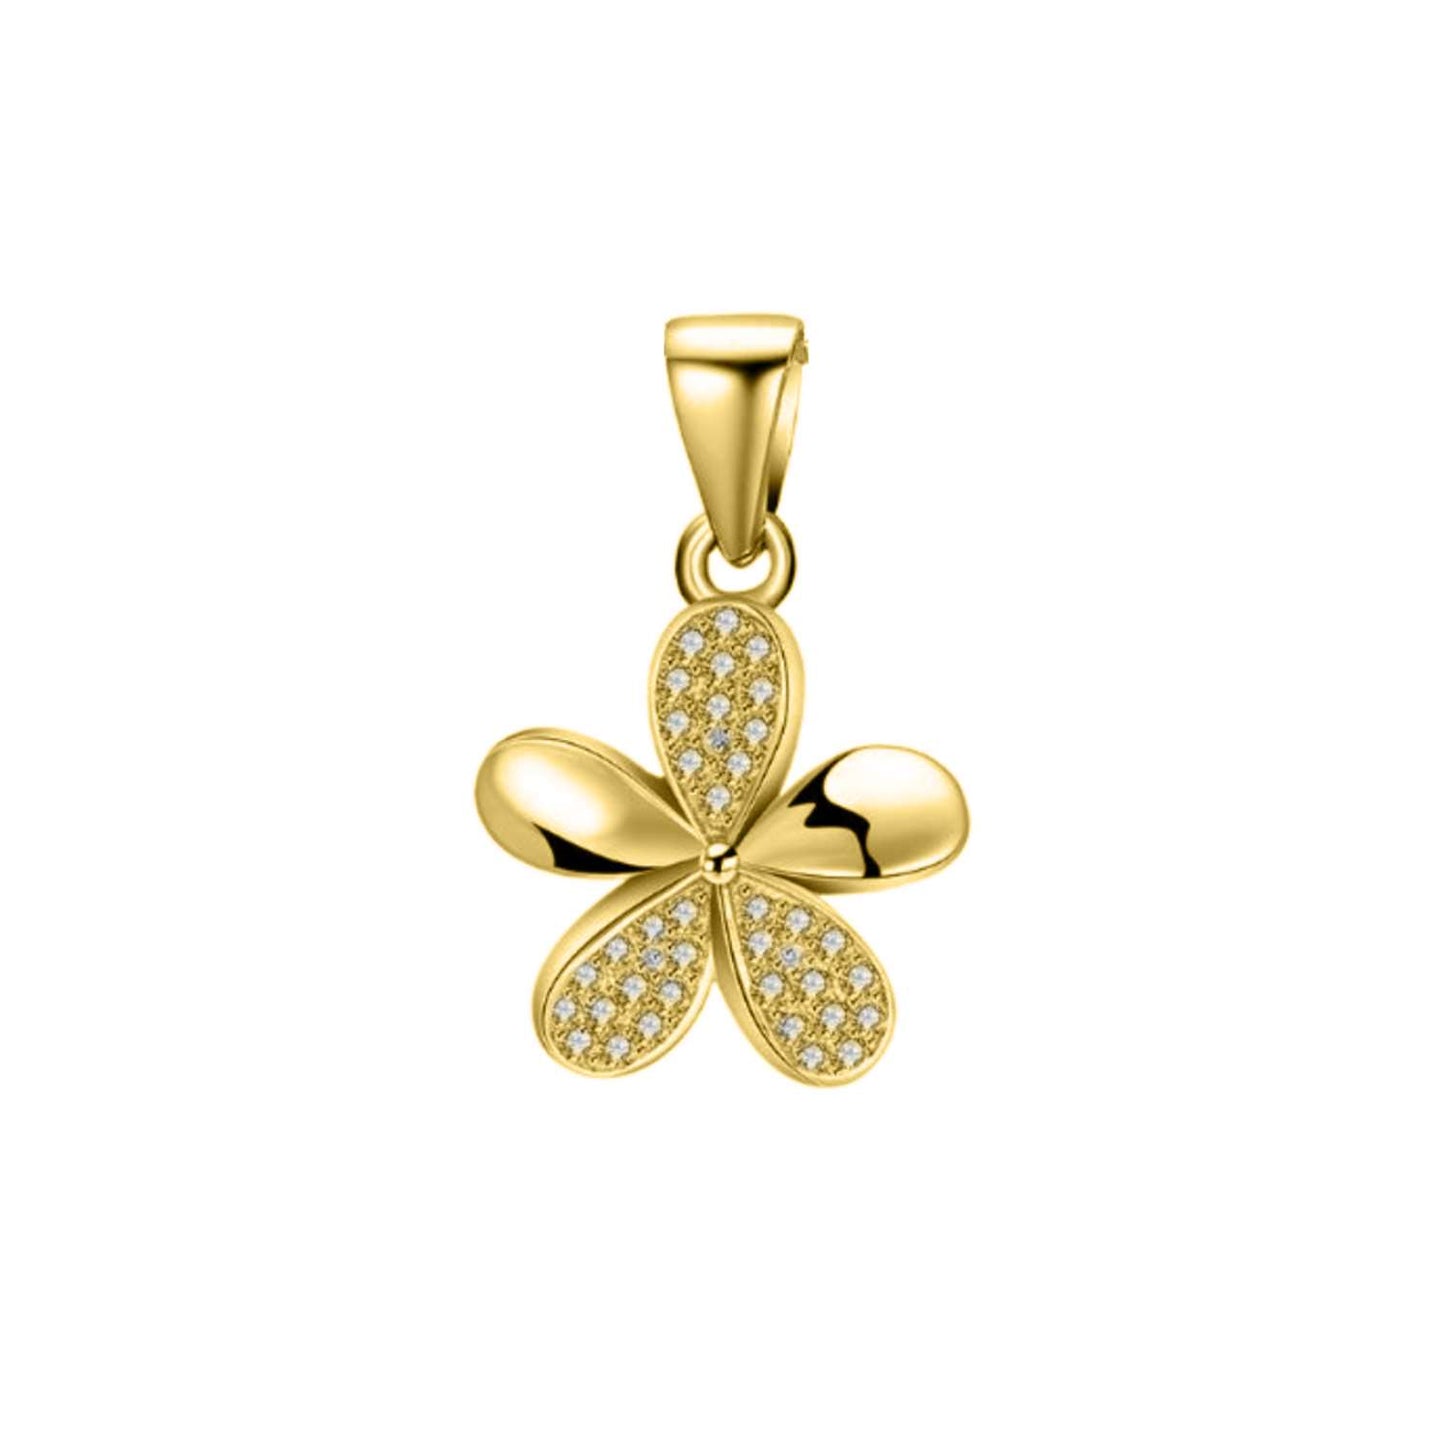 Flower Pendant in 92.5 Sterling Silver - 18k Gold finish, studded with Zirconia